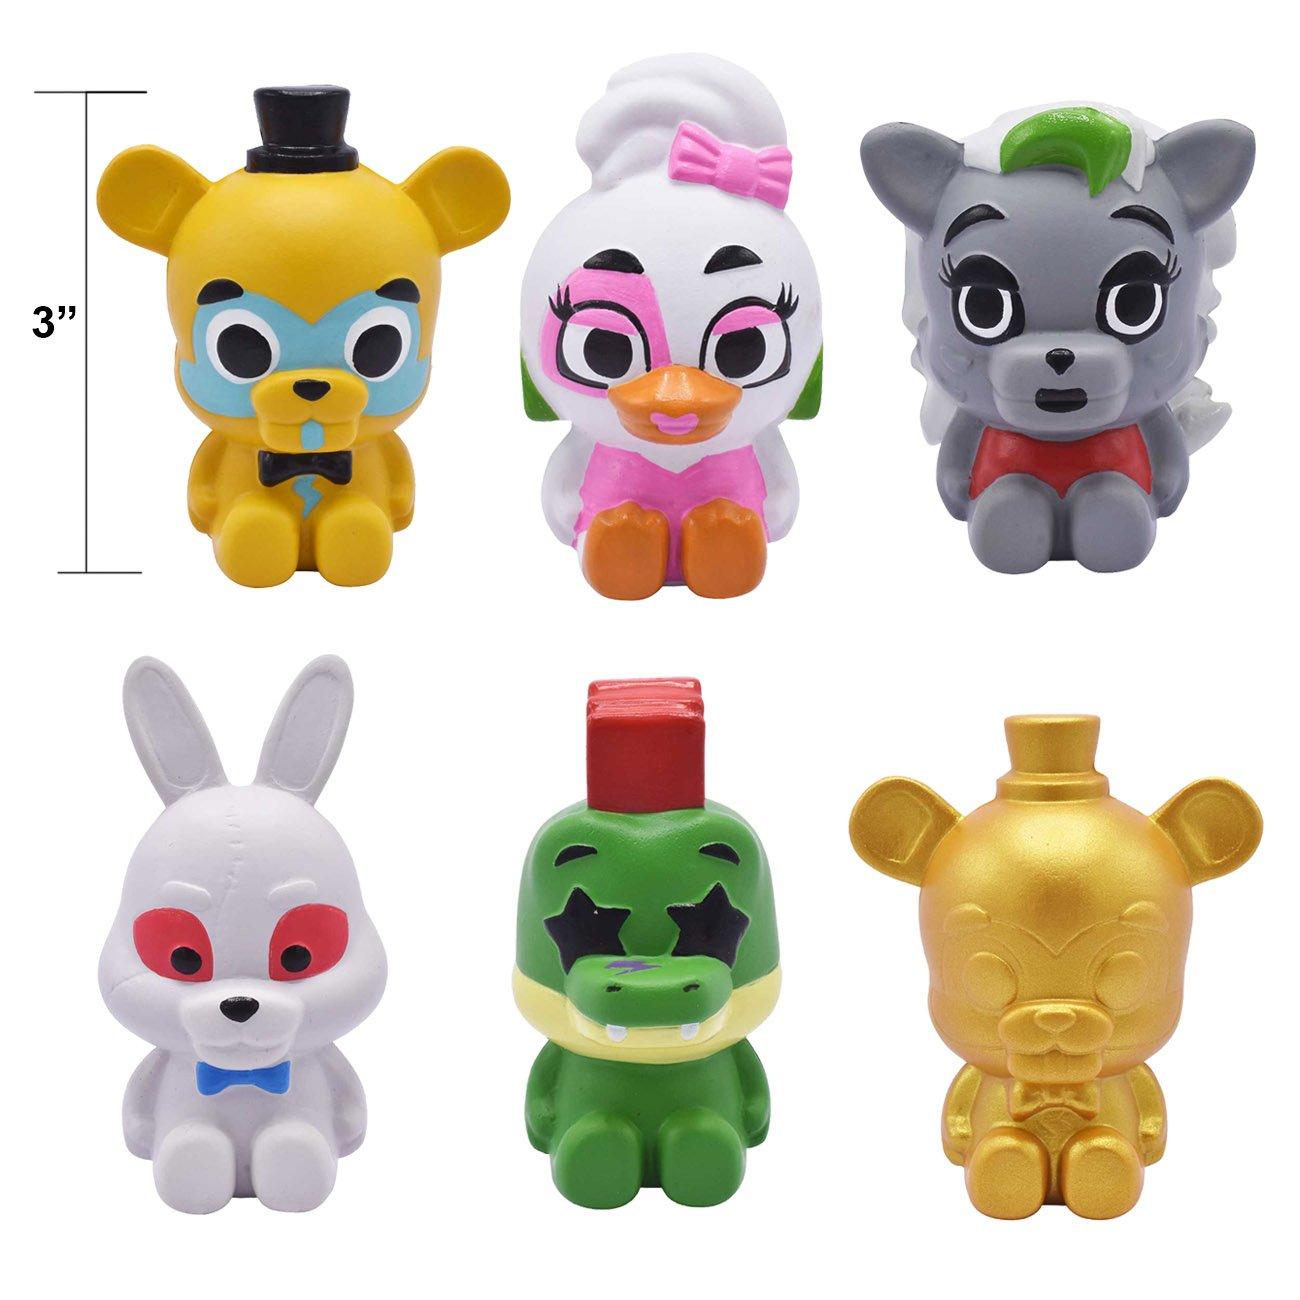 Just Toys Five Nights at Freddy's: Security Breach SquishMe Figures Blind  Box